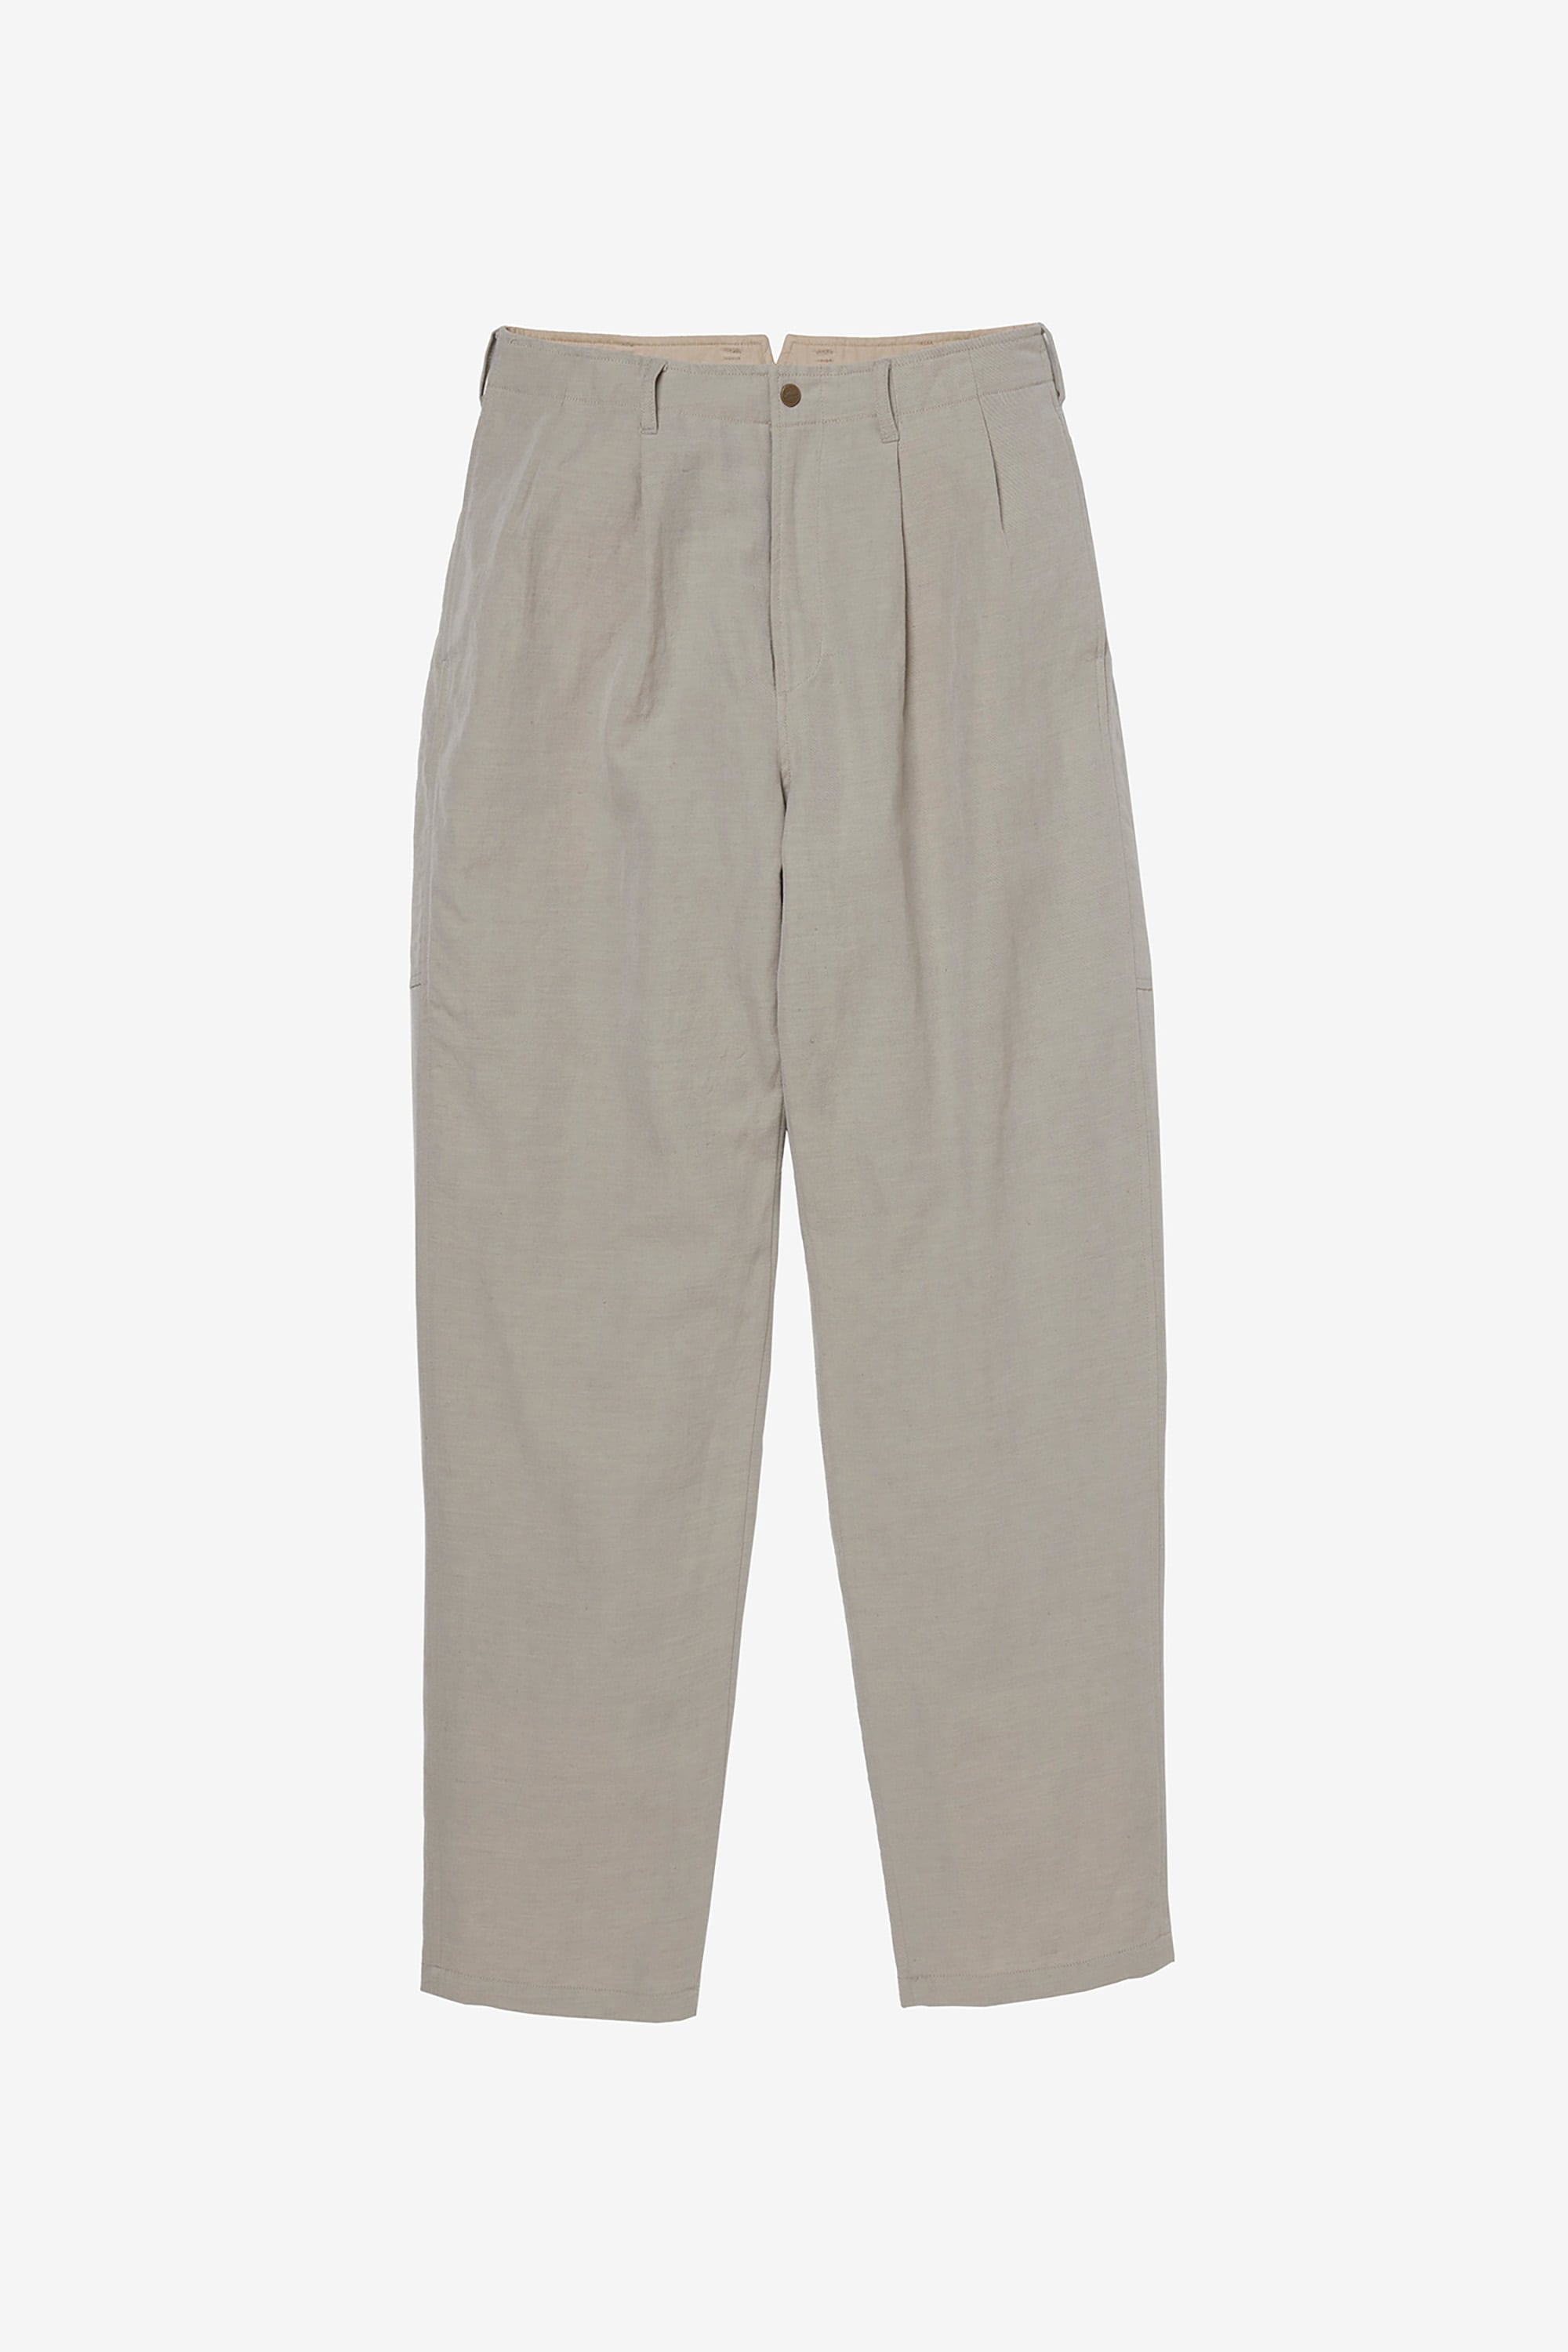 WOOL LINEN WIDE TAPERED PANTS